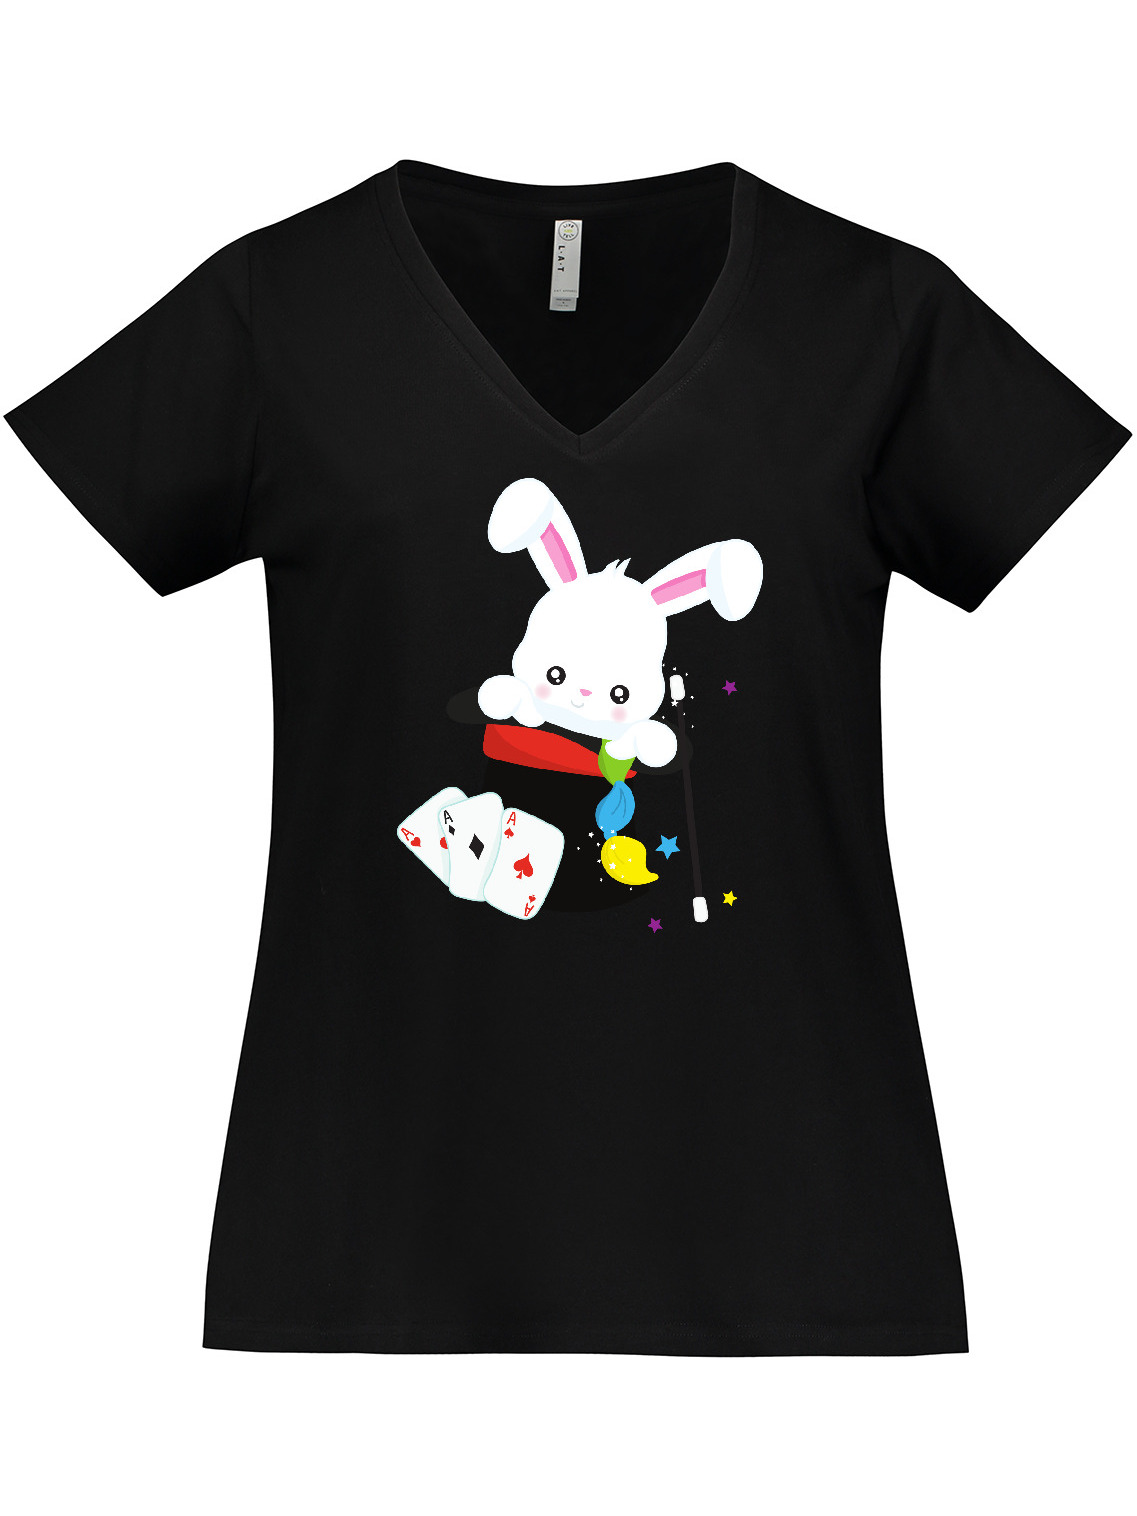 Inktastic White Bunny Coming Out Of A Hat, Magic Trick Women's Plus Size V-Neck T-Shirt - image 1 of 4